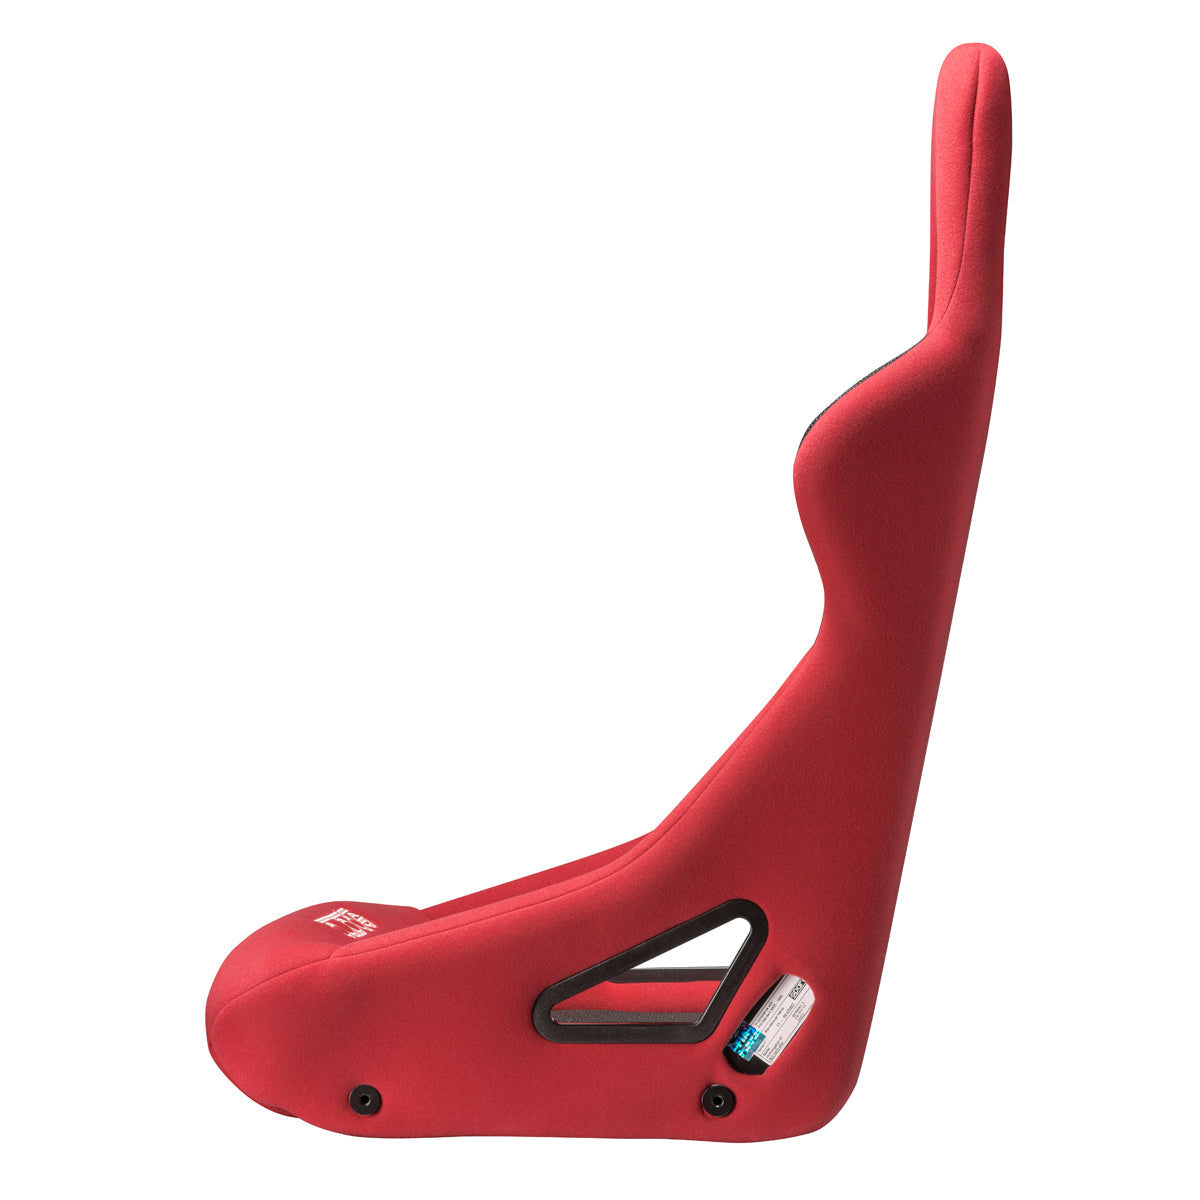 Sparco Sprint L Racing Seat